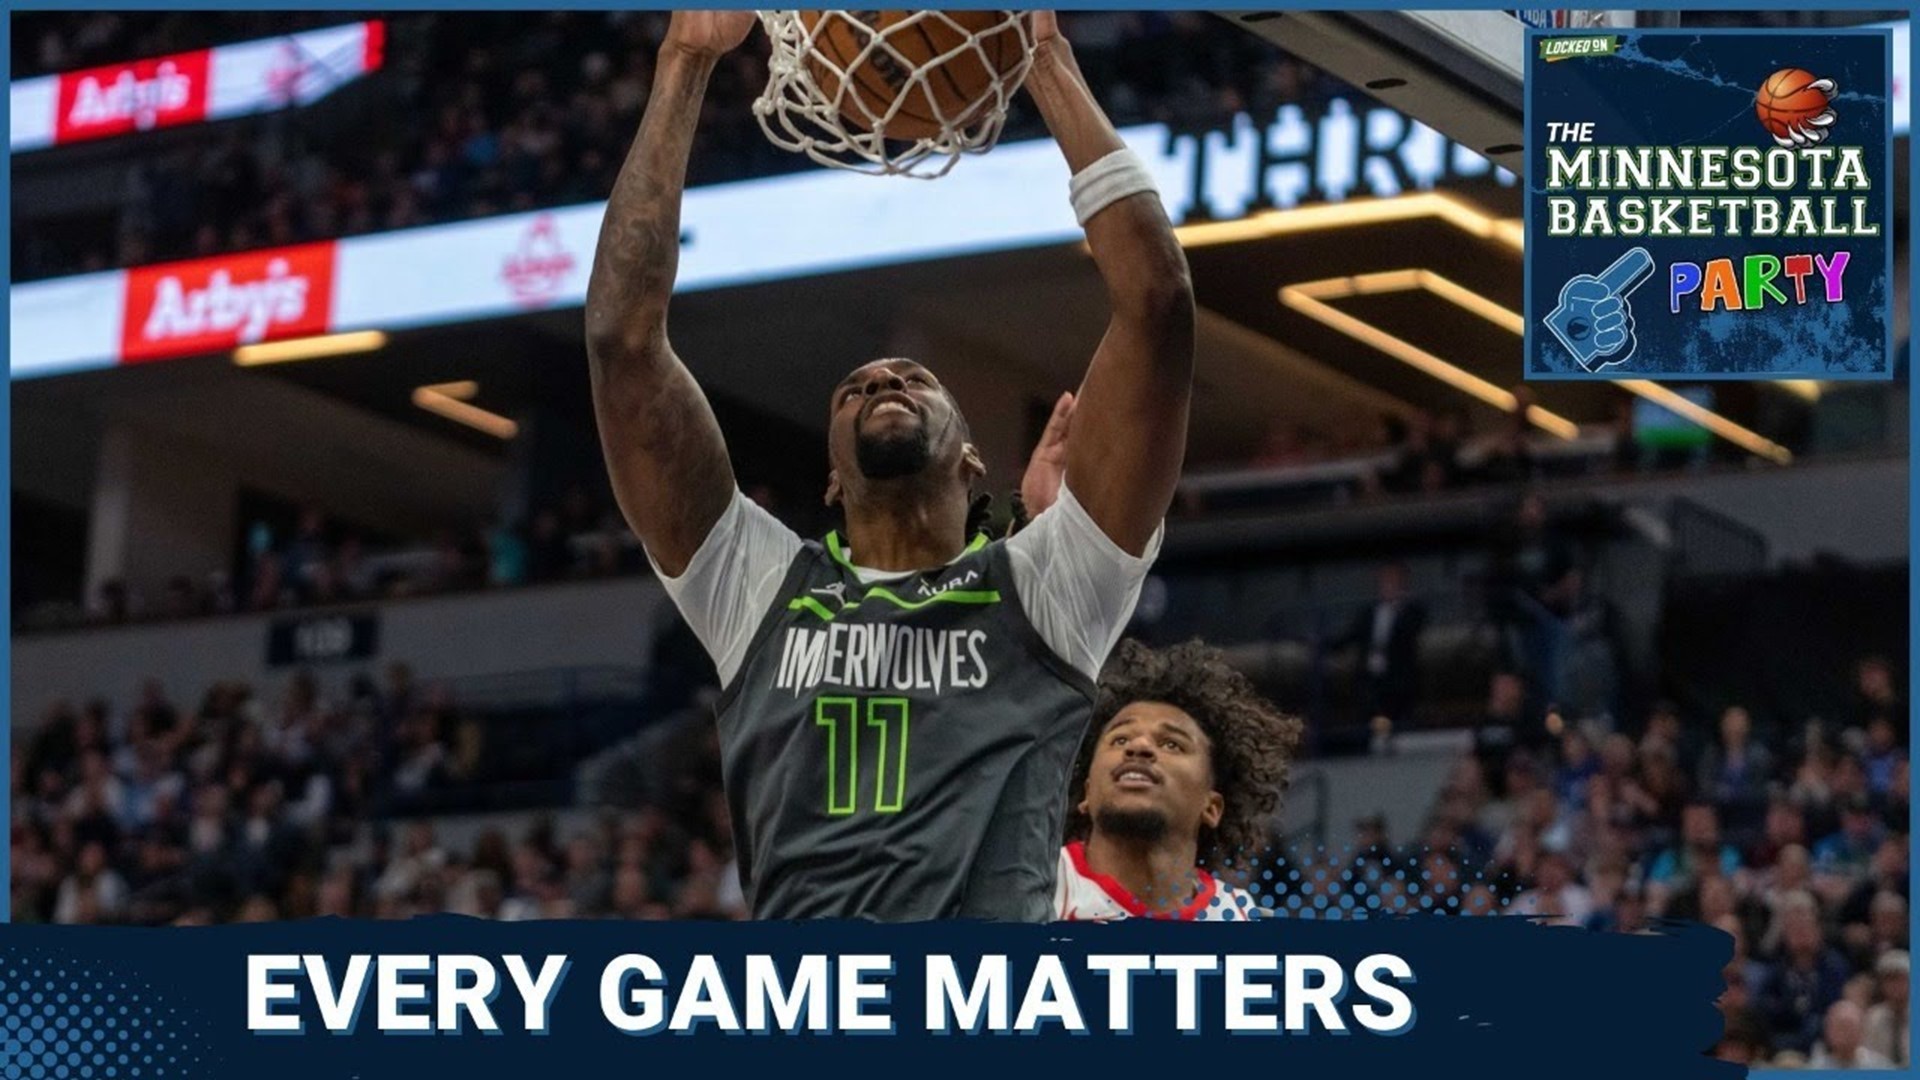 The Minnesota Timberwolves' Push to Win the West is Getting INTENSE - The Minnesota Basketball Party